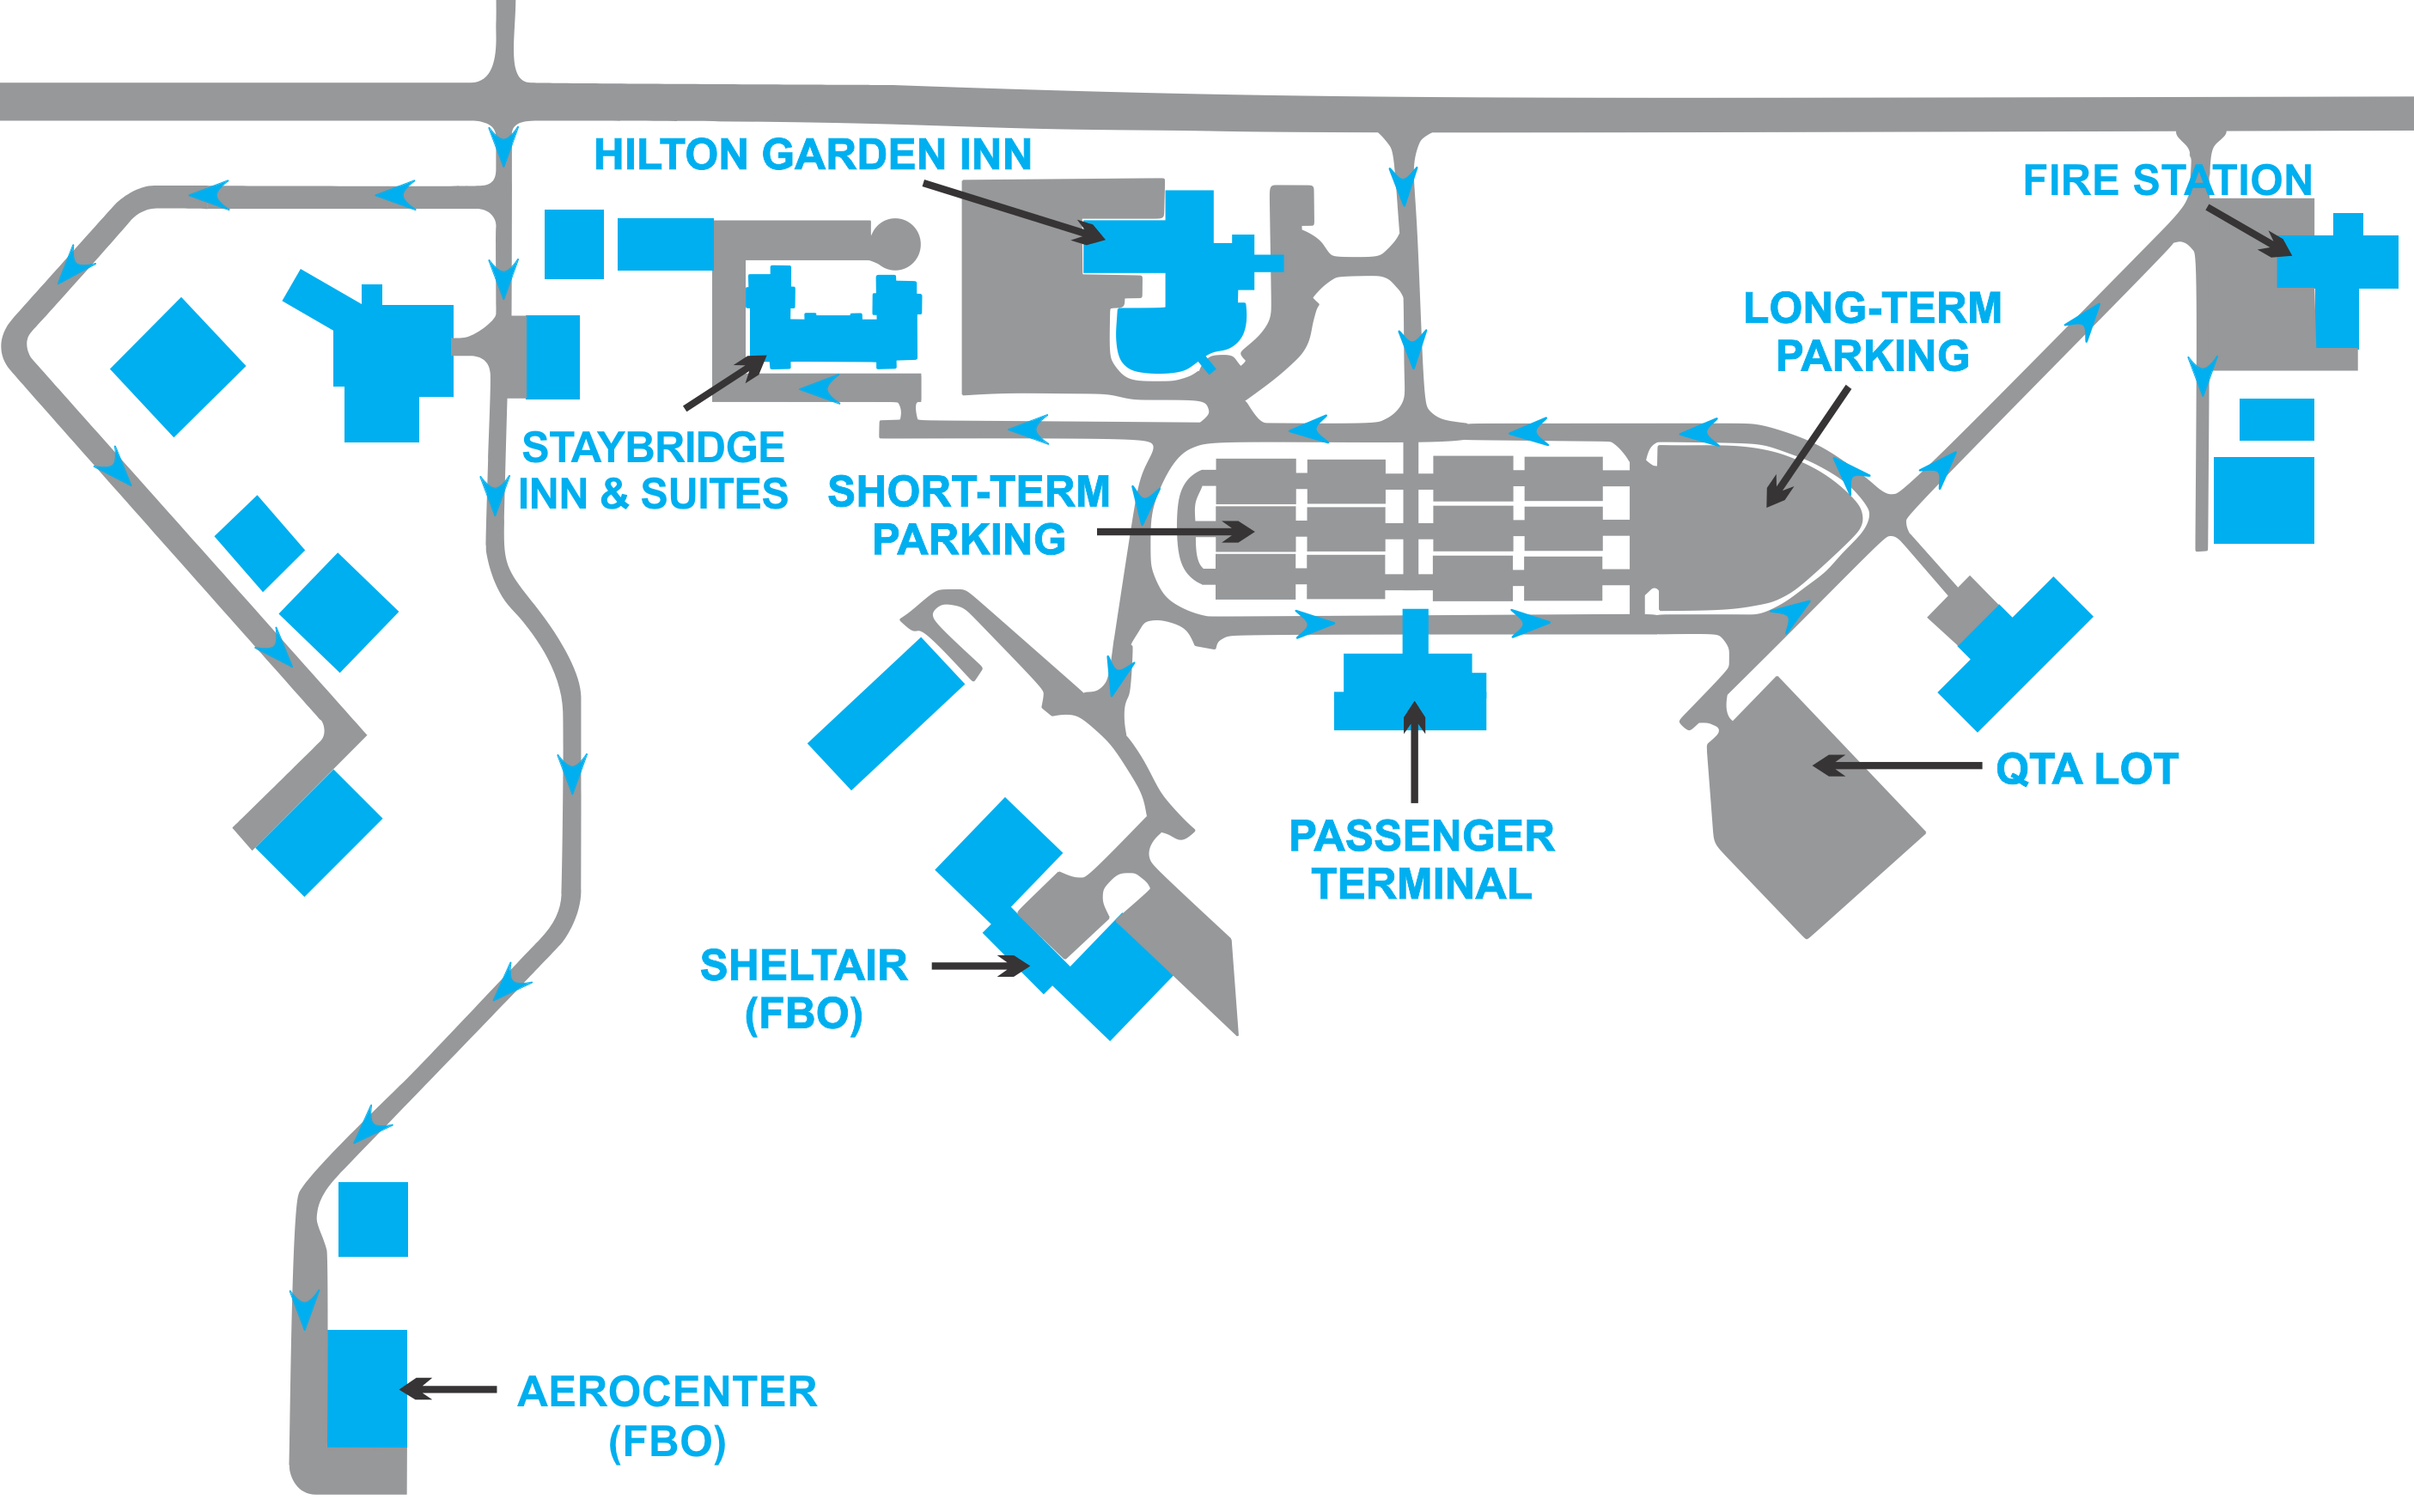 Parking is FREE at the Lakeland Airport and this map shows areas in blue for parking.